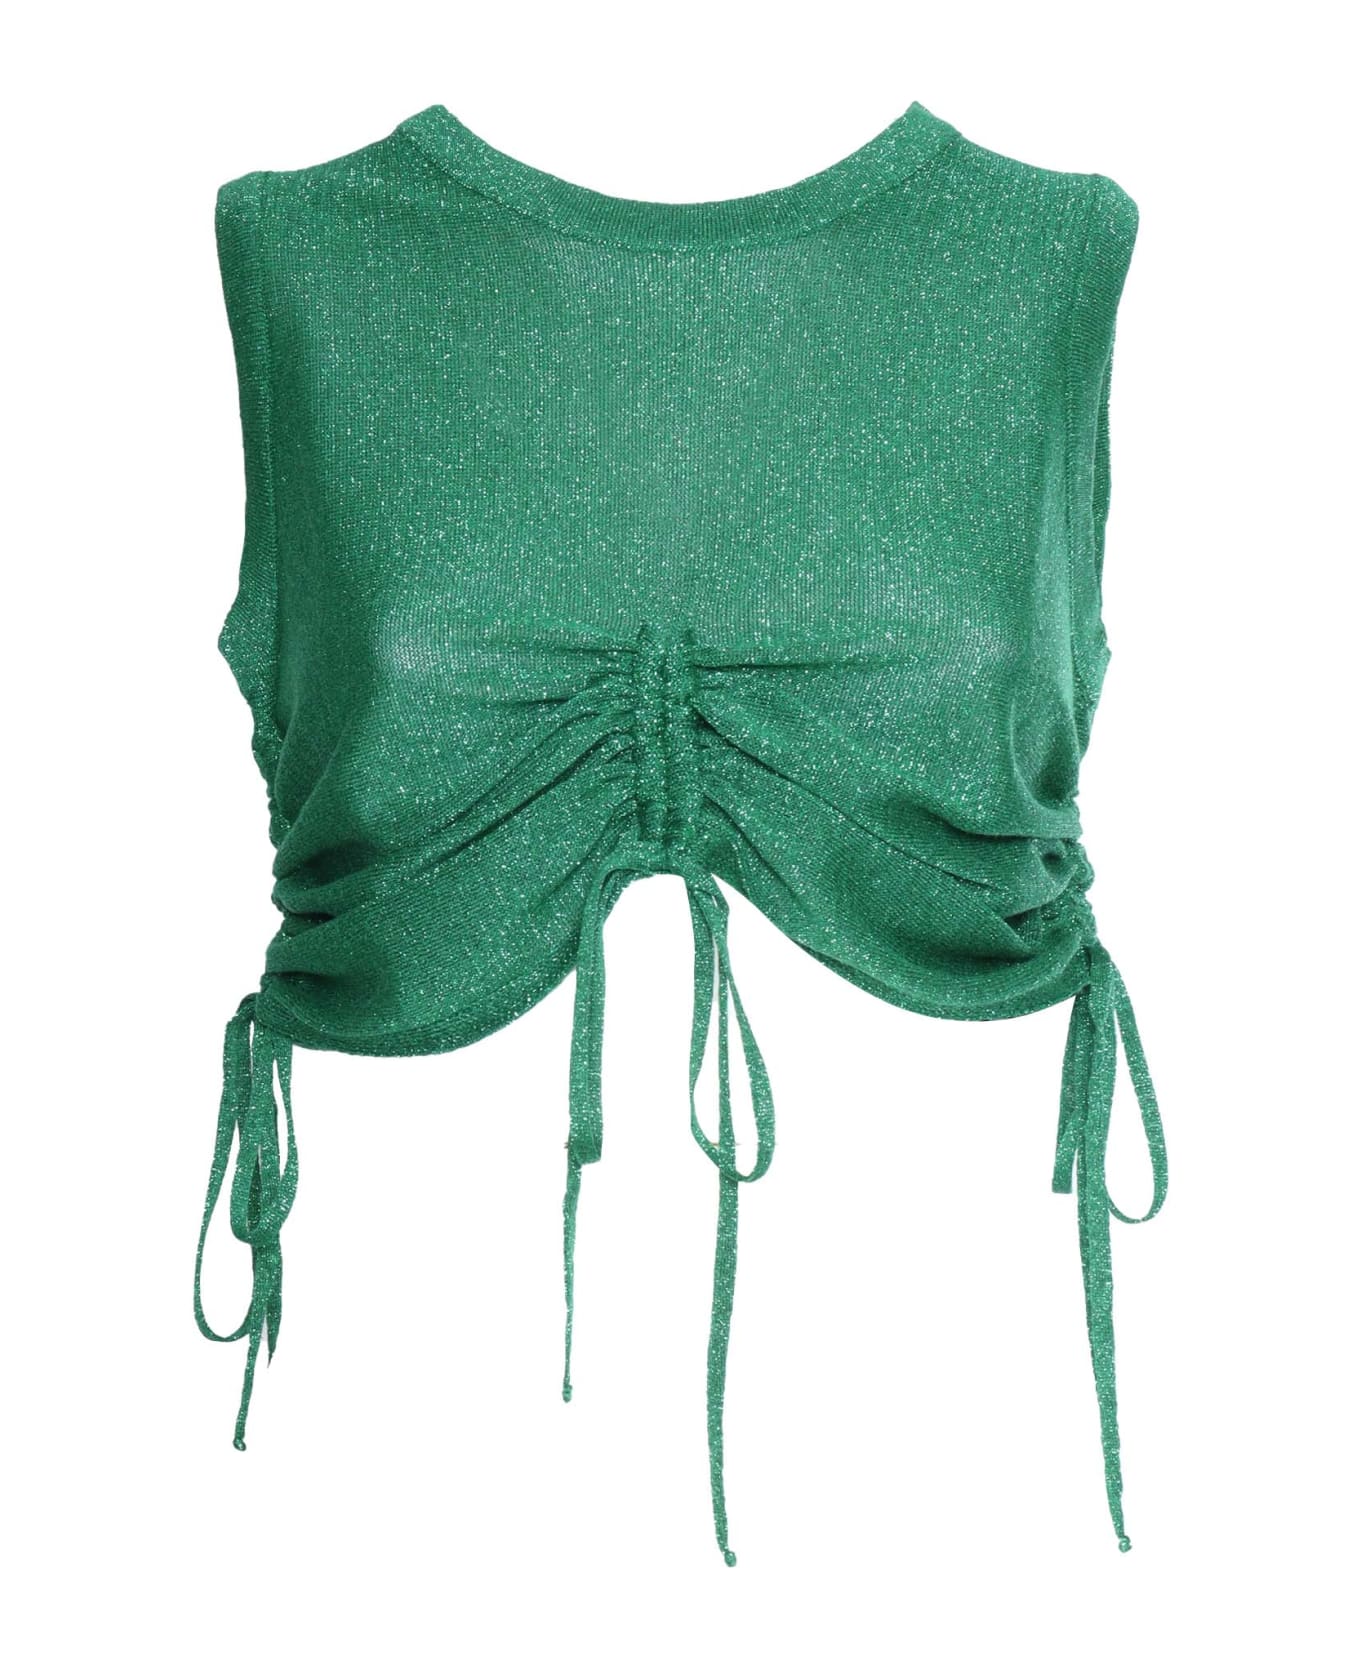 Ermanno Ermanno Scervino Green Knitted Top - GREEN ブラウス